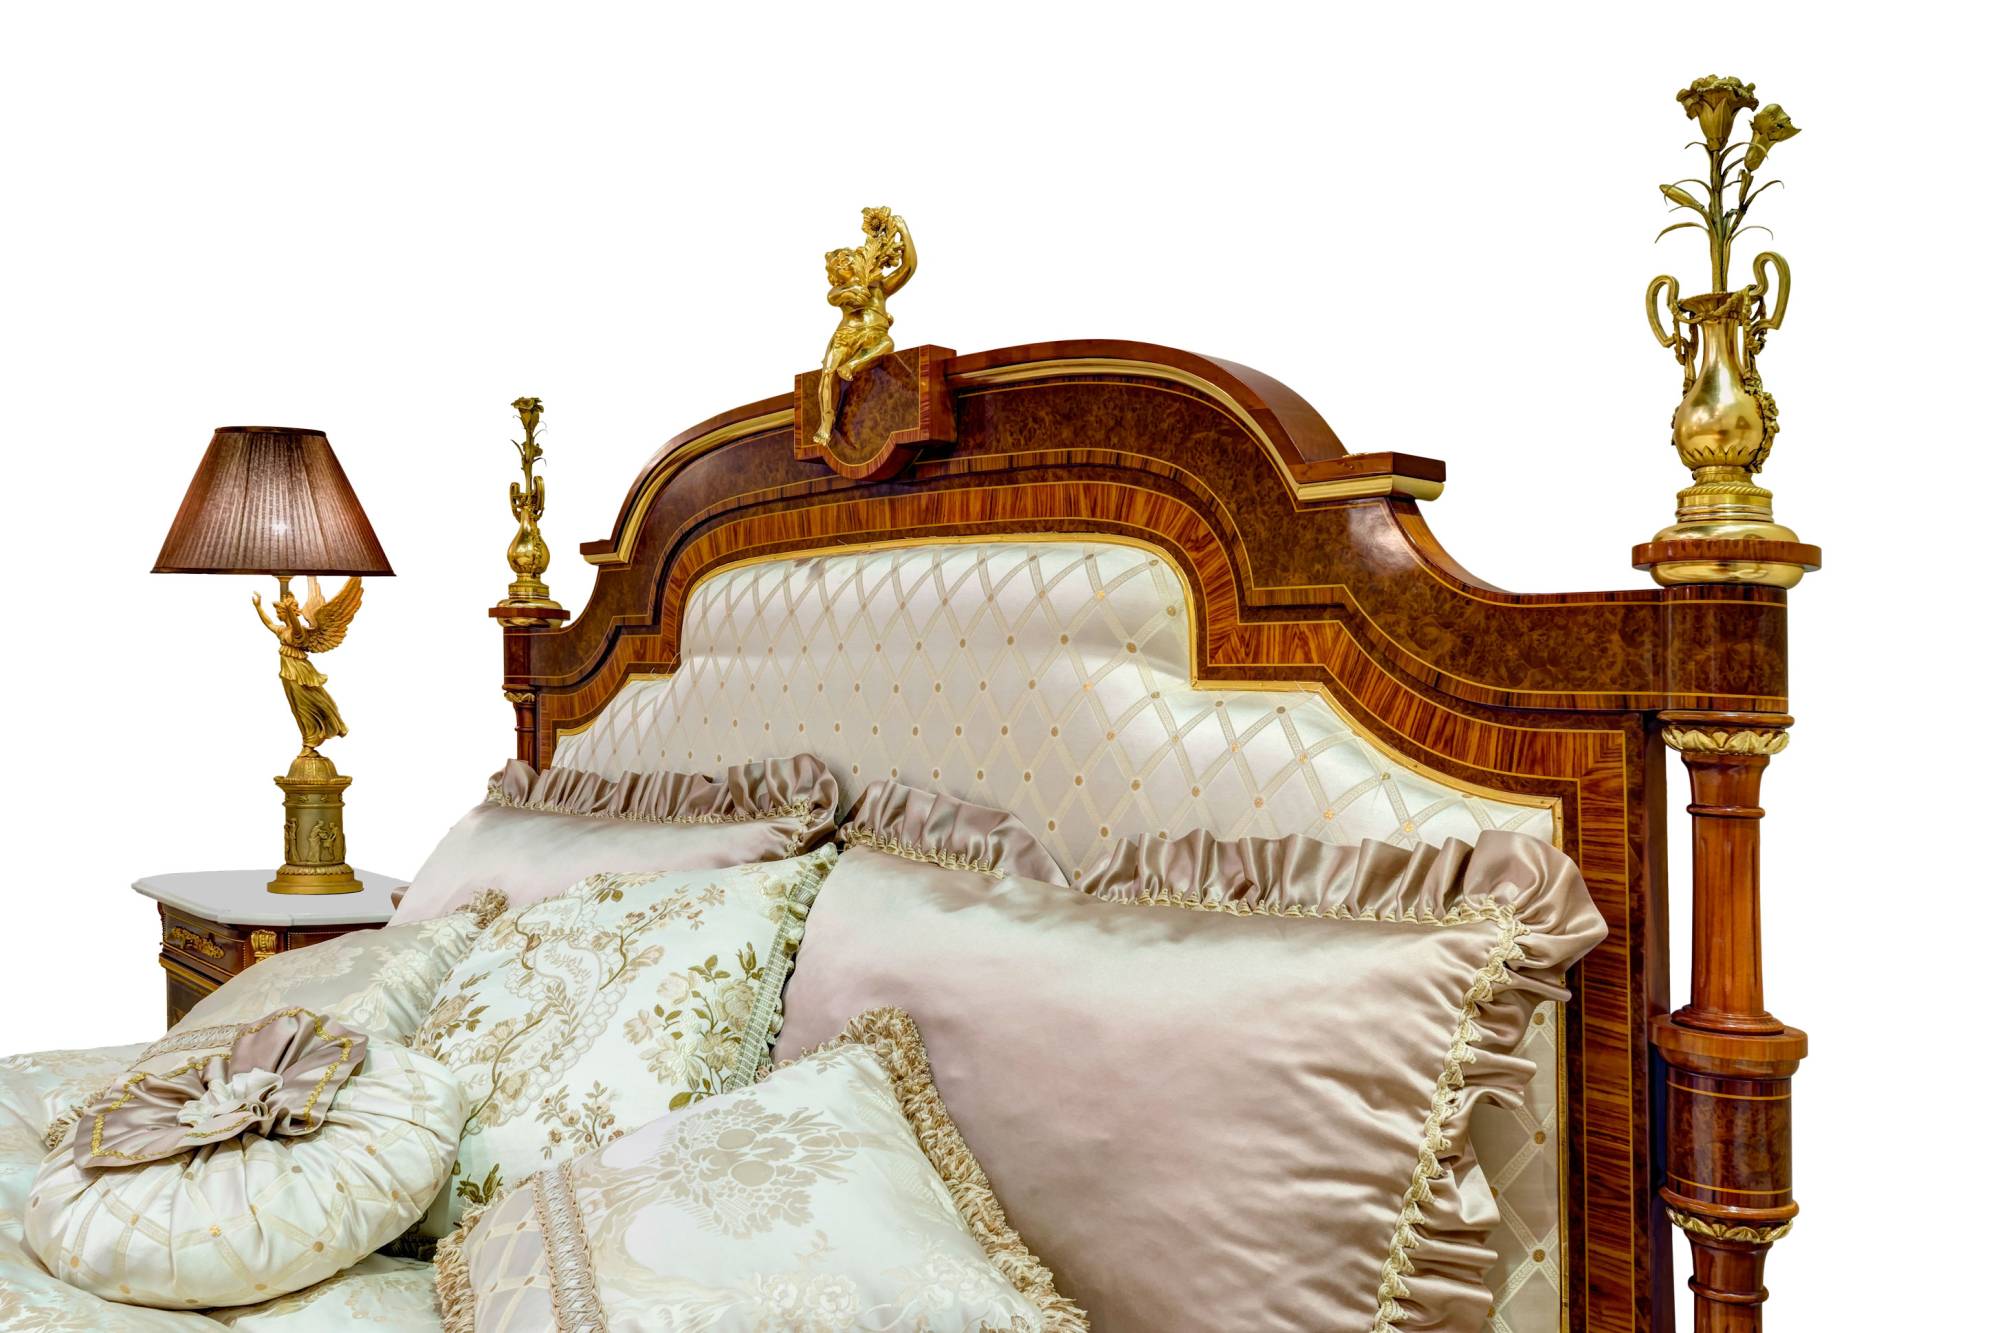 ART. 2088 - C.G. Capelletti quality furniture with made in Italy contemporary Beds